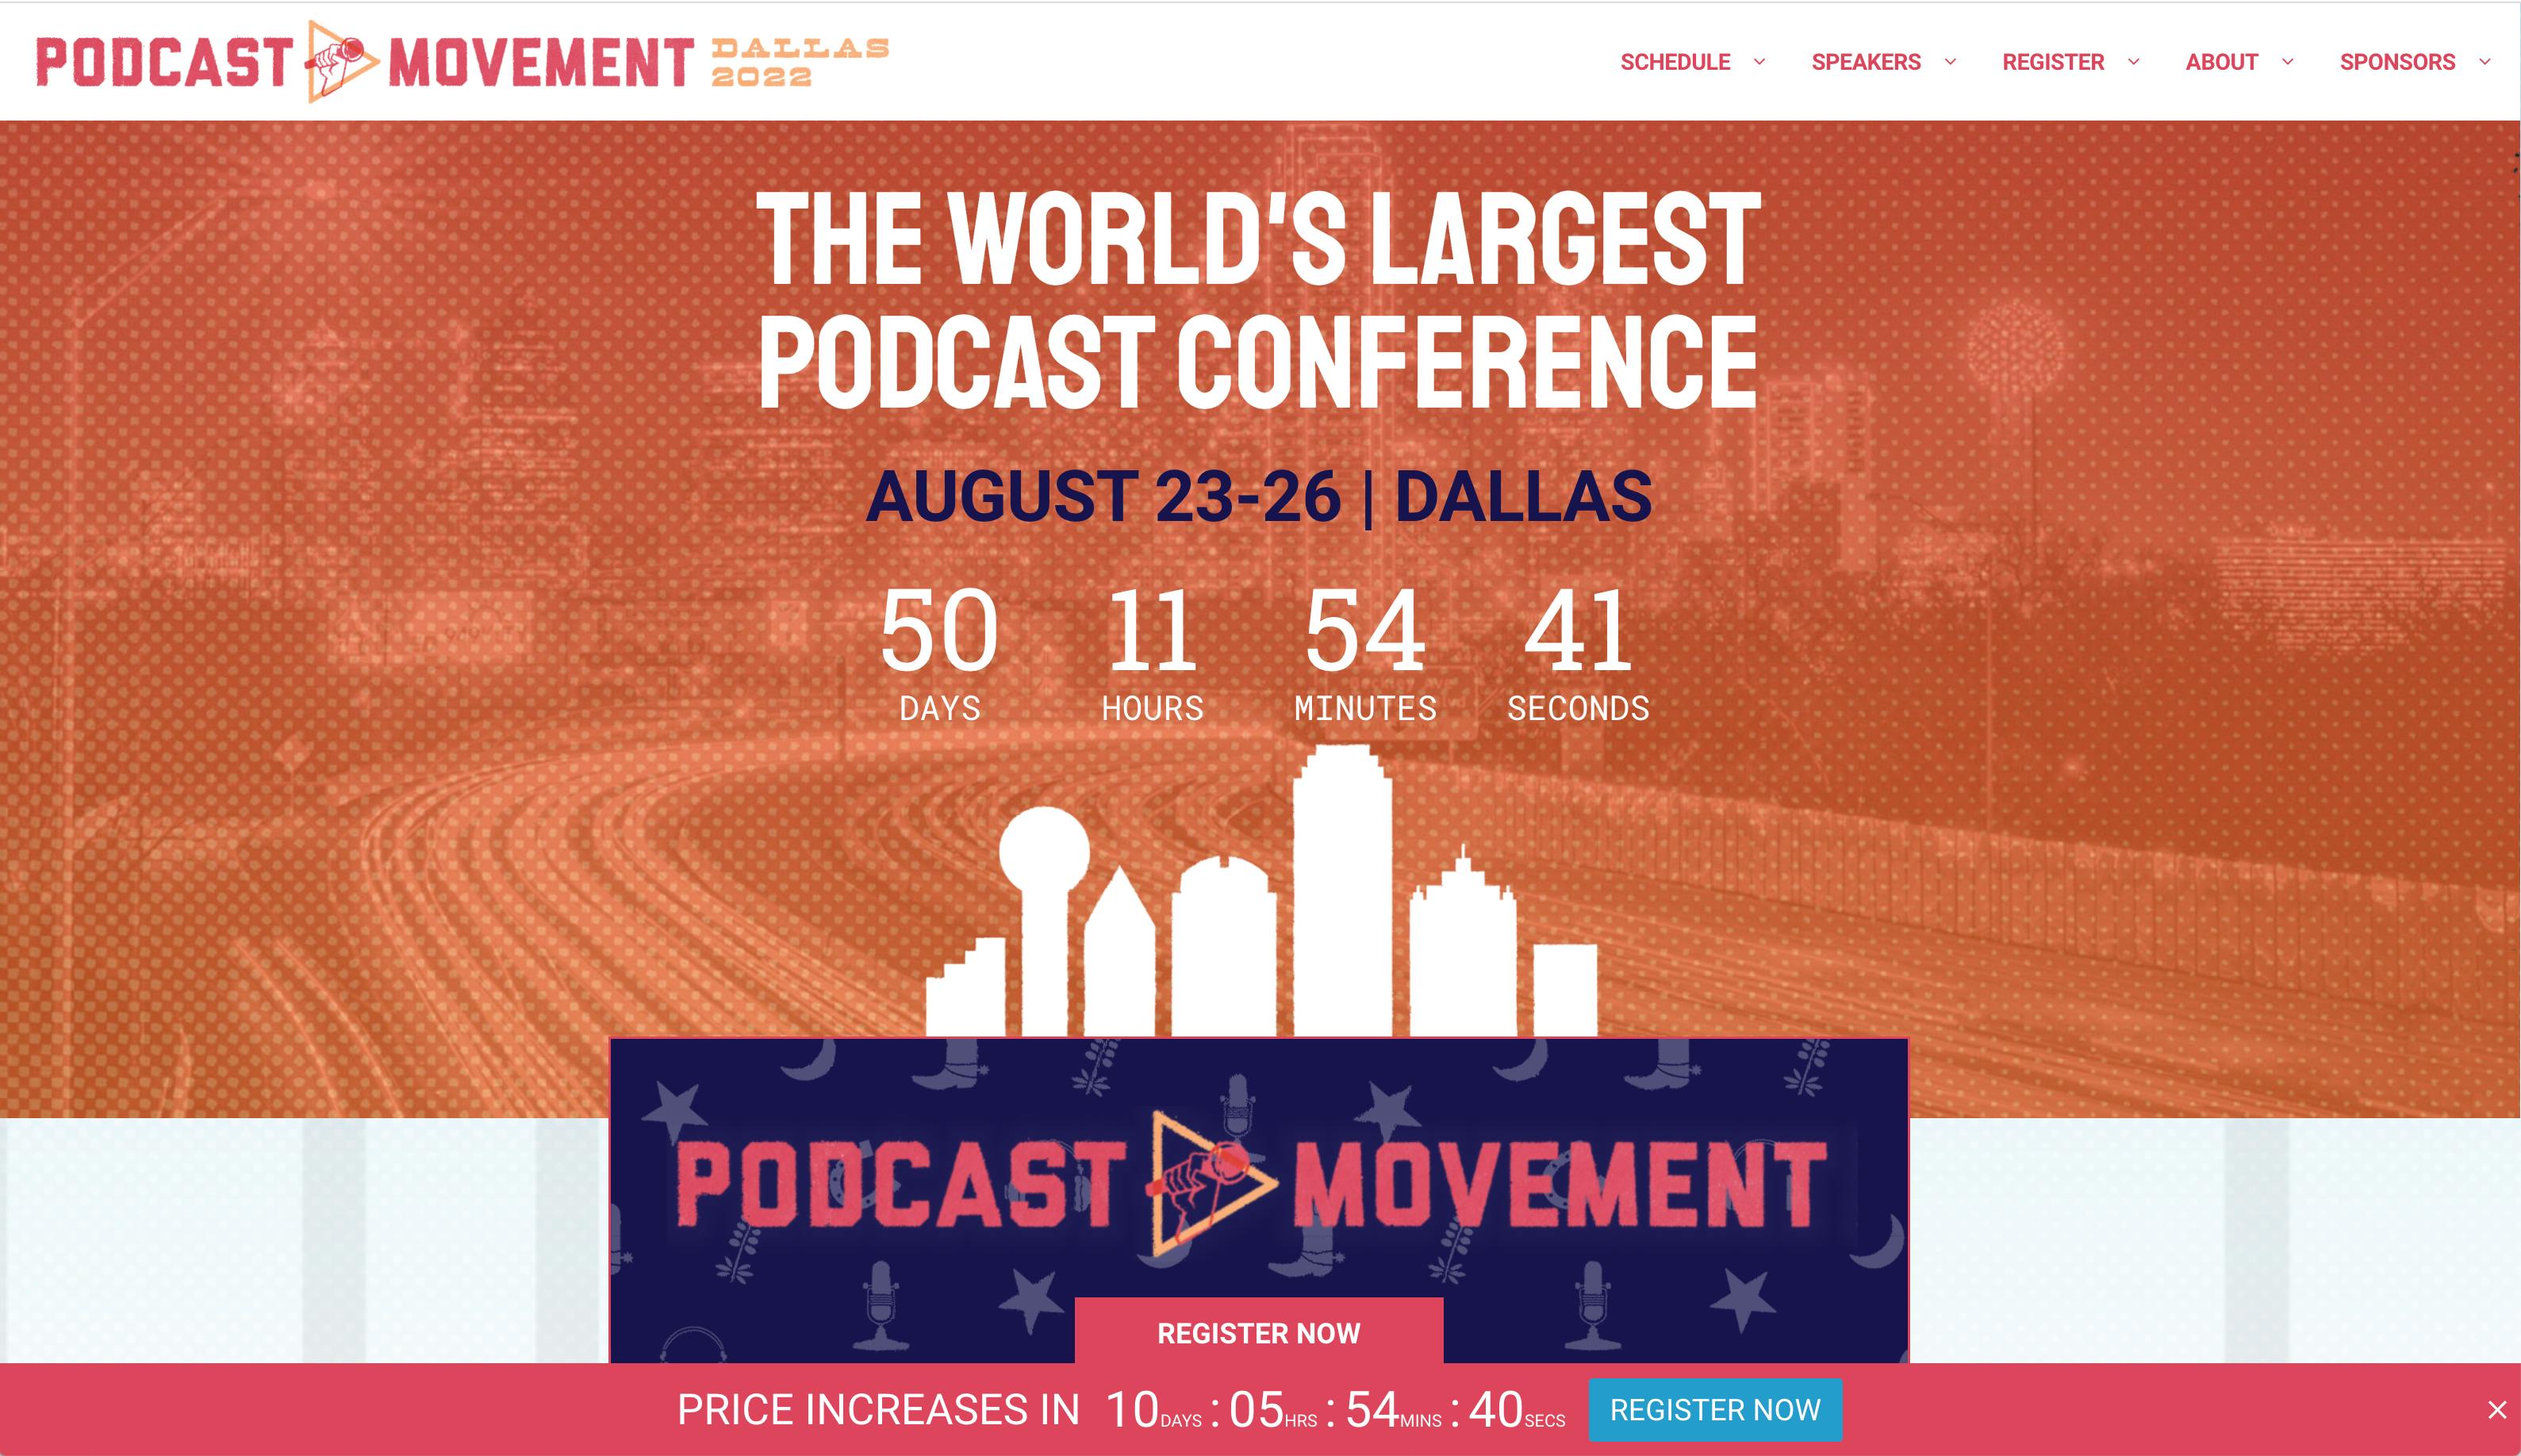 Podcast Movement homepage